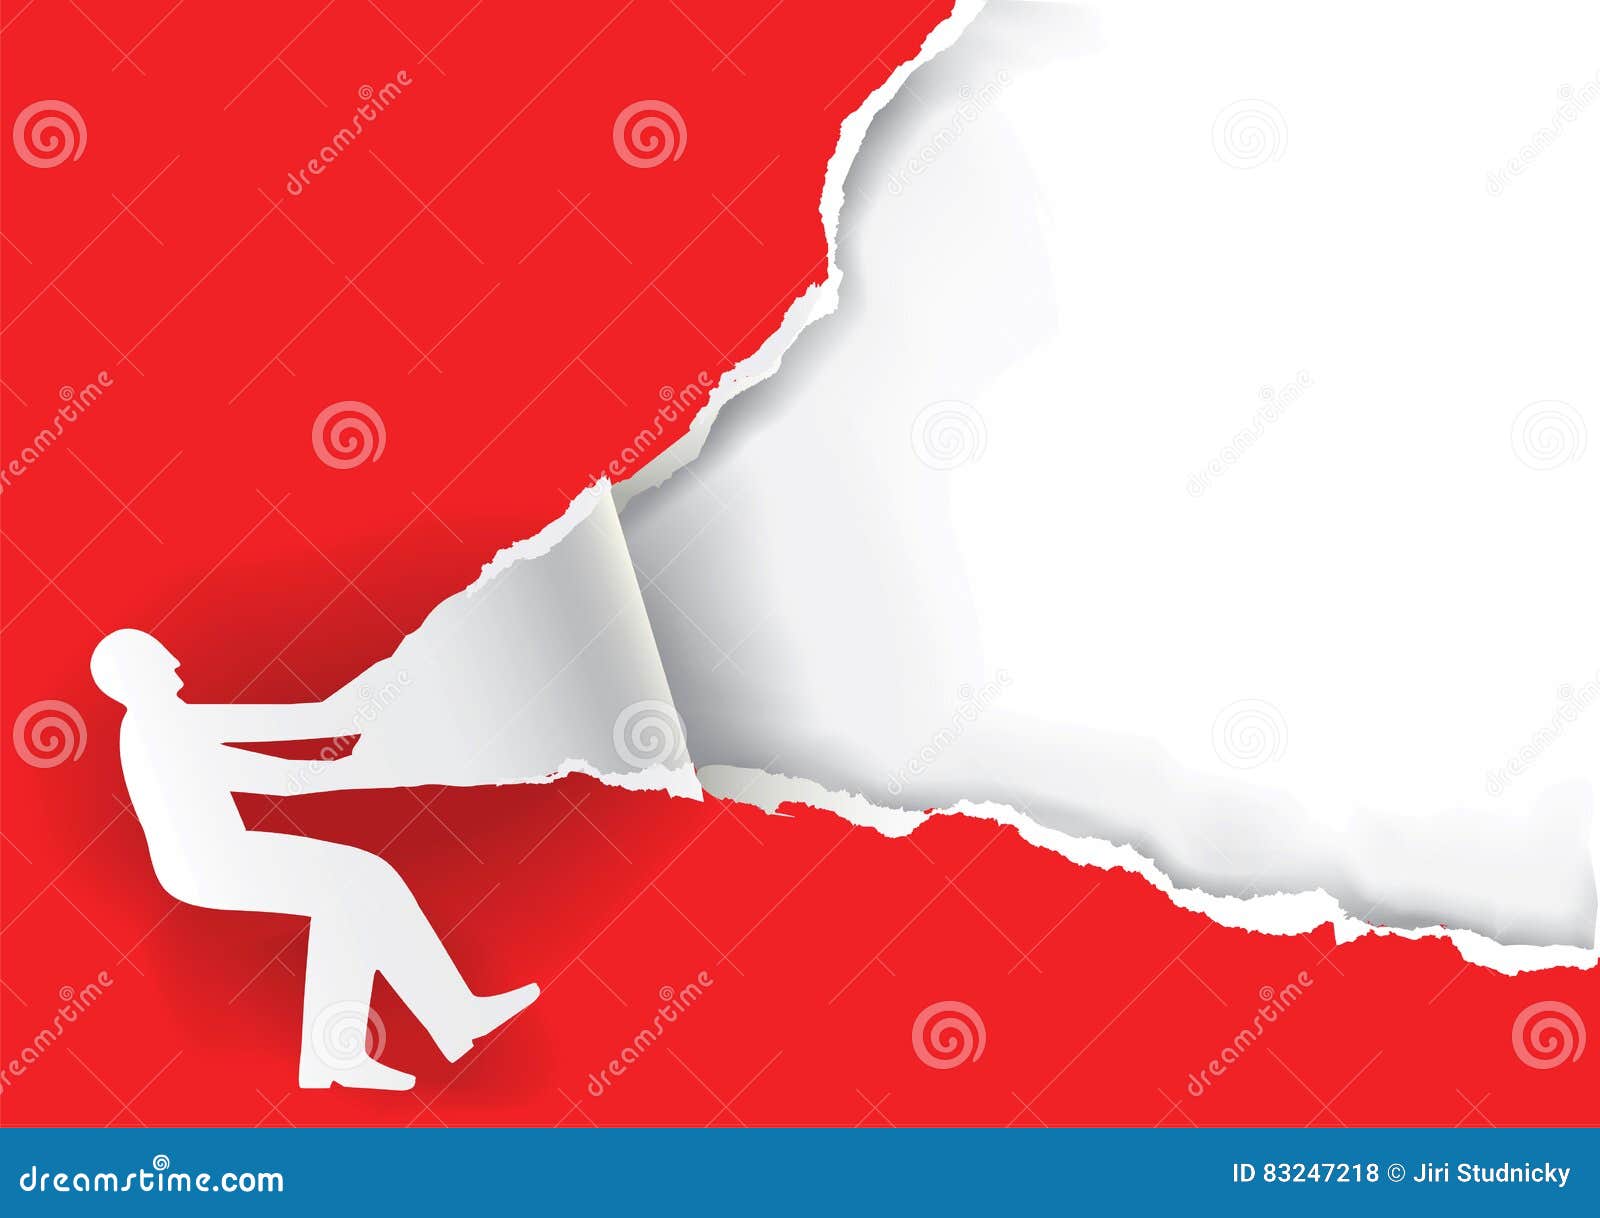 man ripping red paper background.